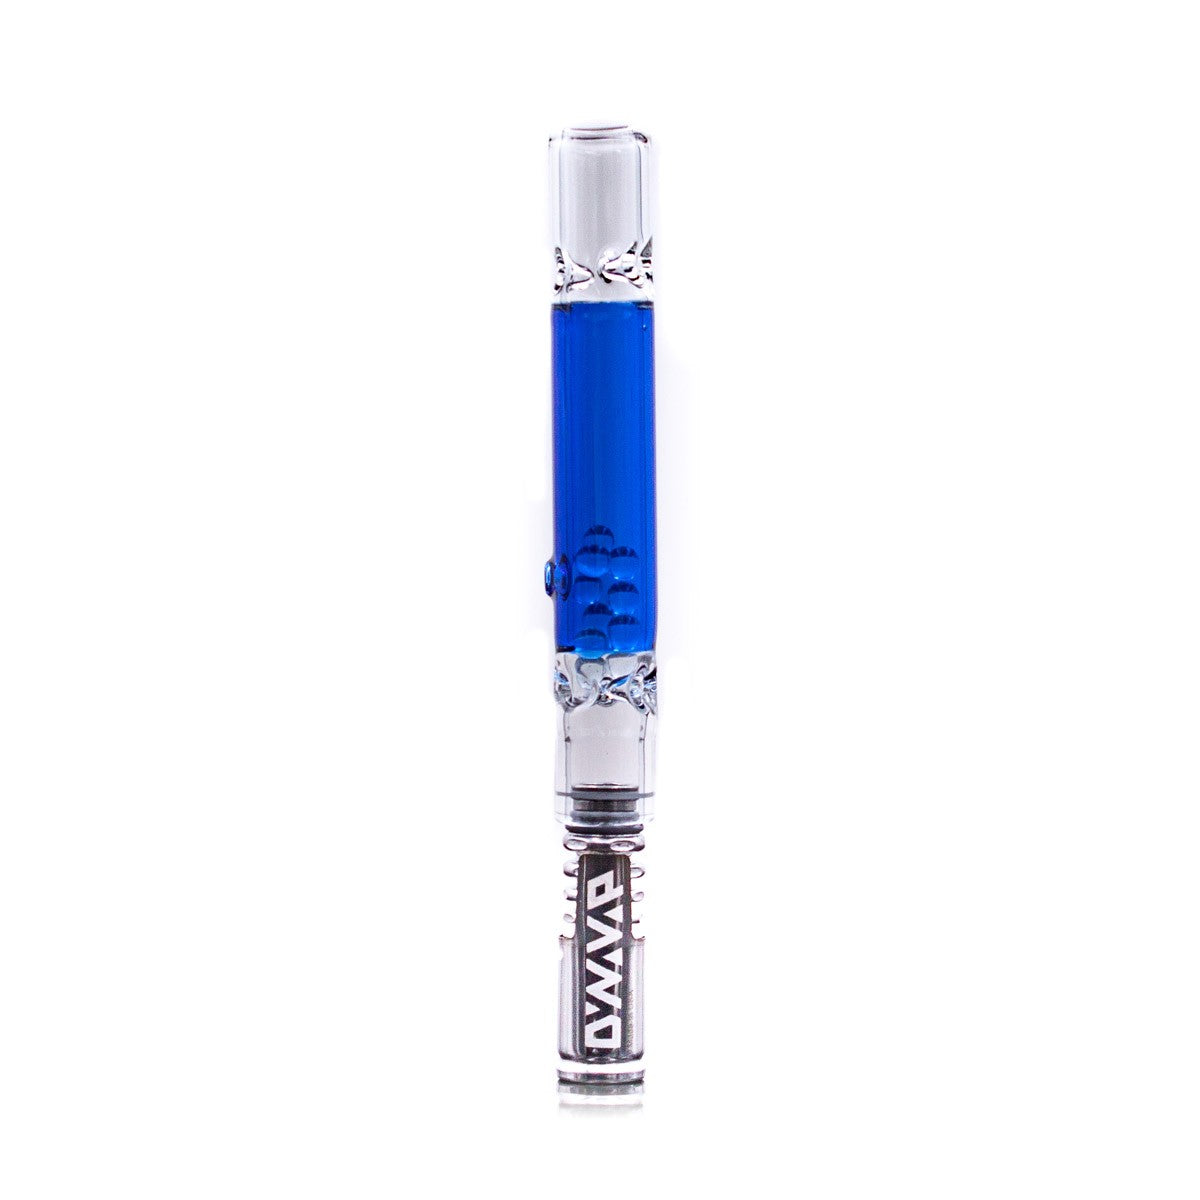 Blue Rattler Glass Cooling Stem for DynaVap by The Stash Shack, front view on white background